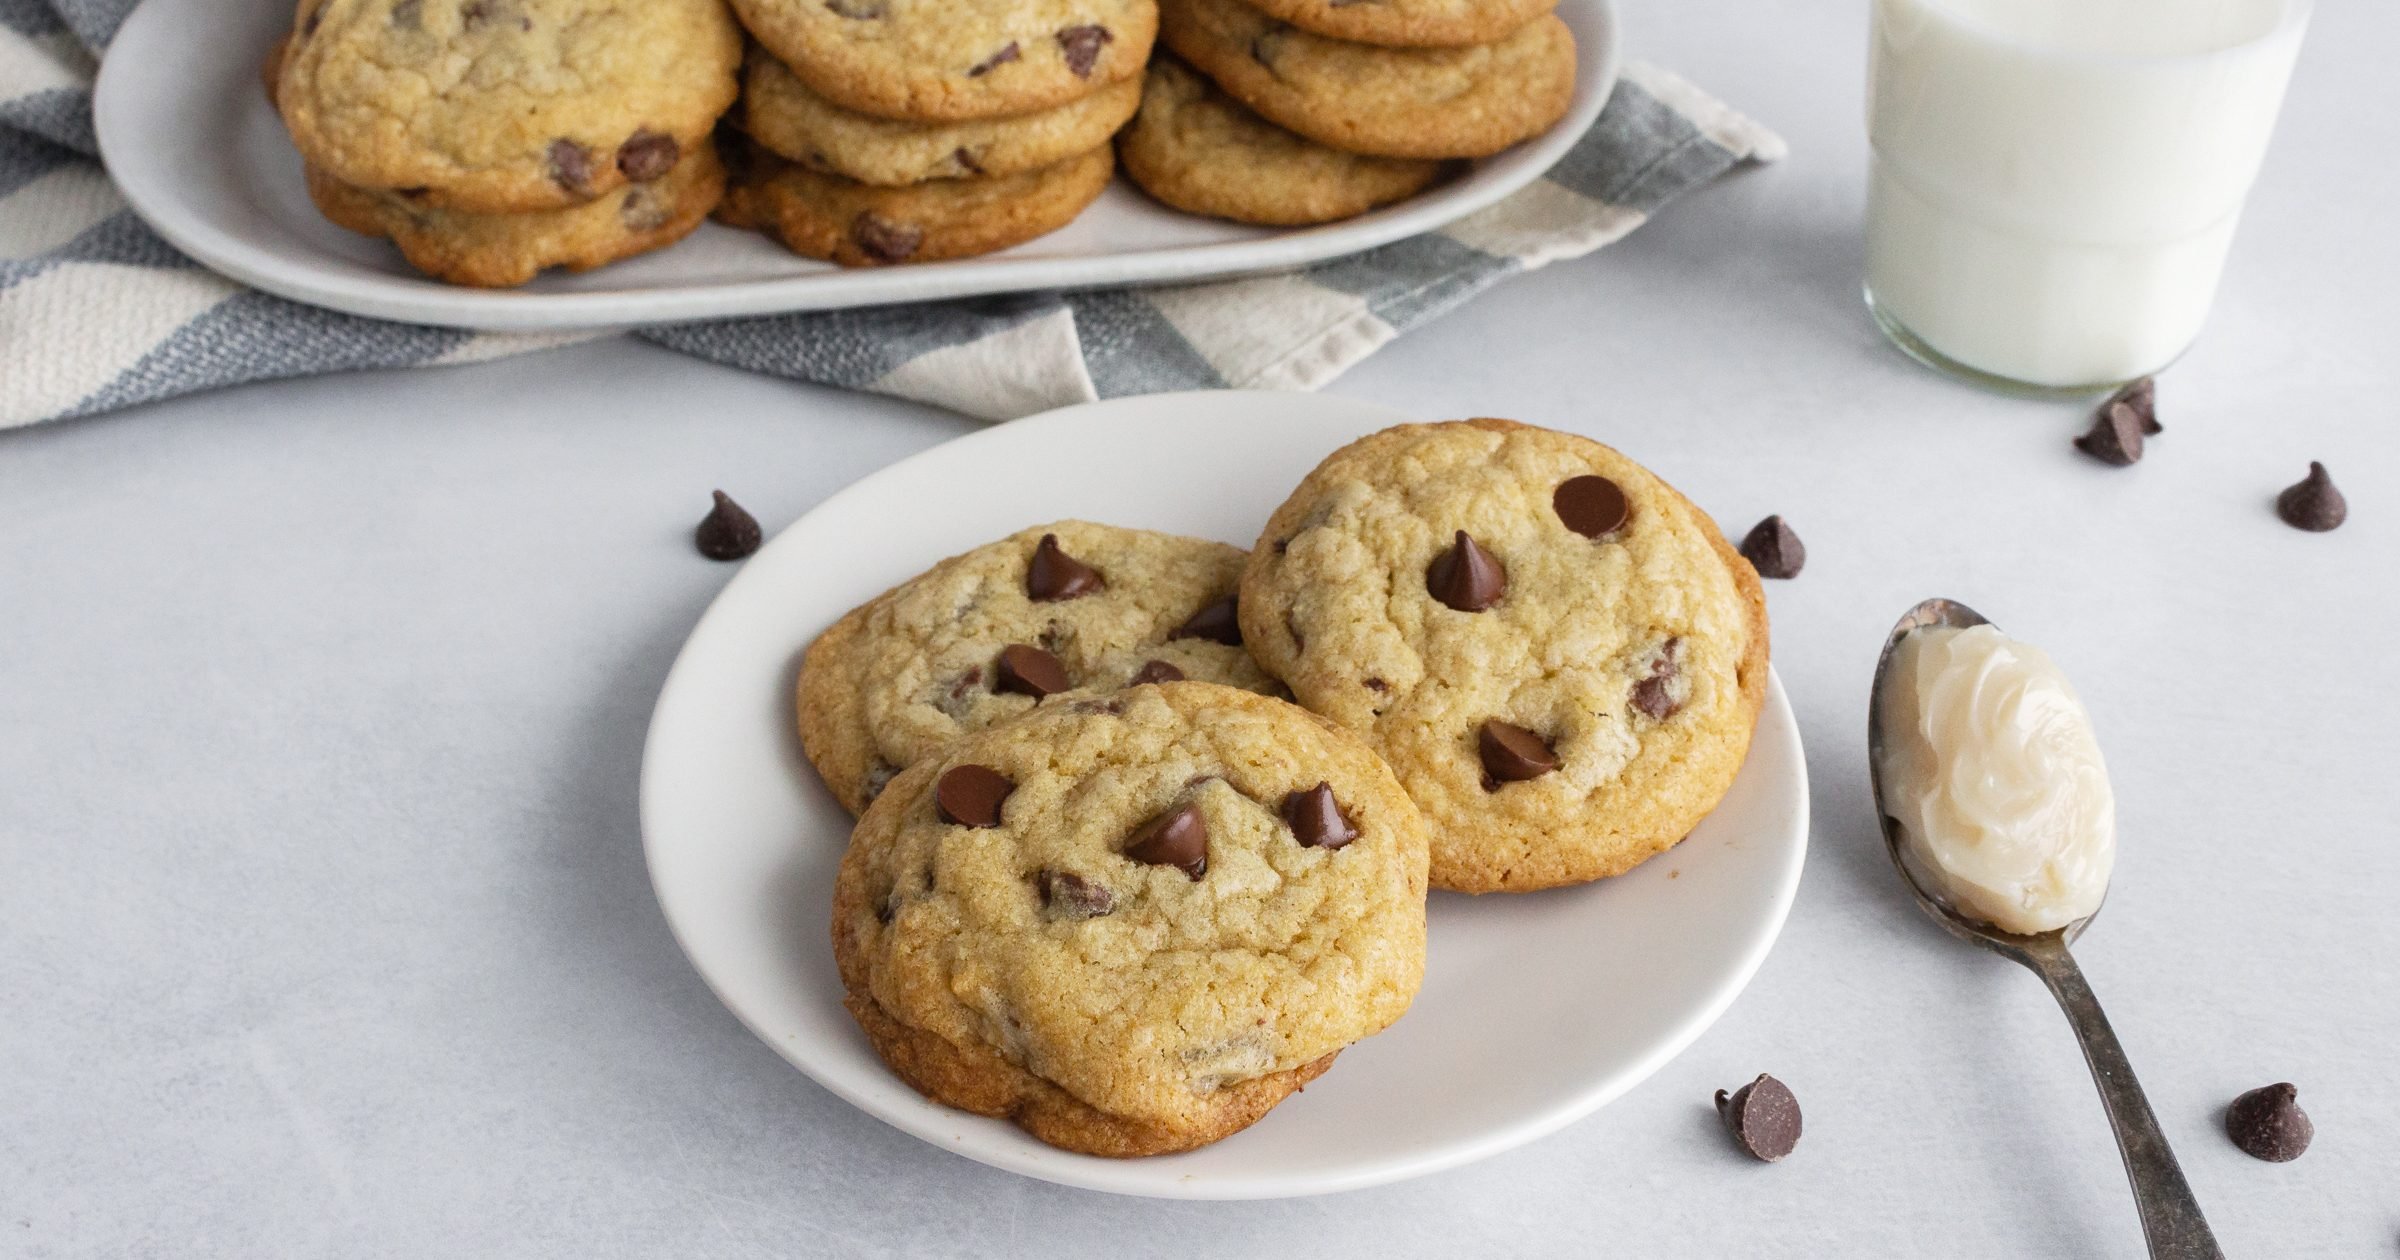 https://www.tasteofhome.com/wp-content/uploads/2022/01/Chocolate-Chip-Cookies-with-Bacon-Grease.TOH_.Nancy-Mock-9-S.jpg